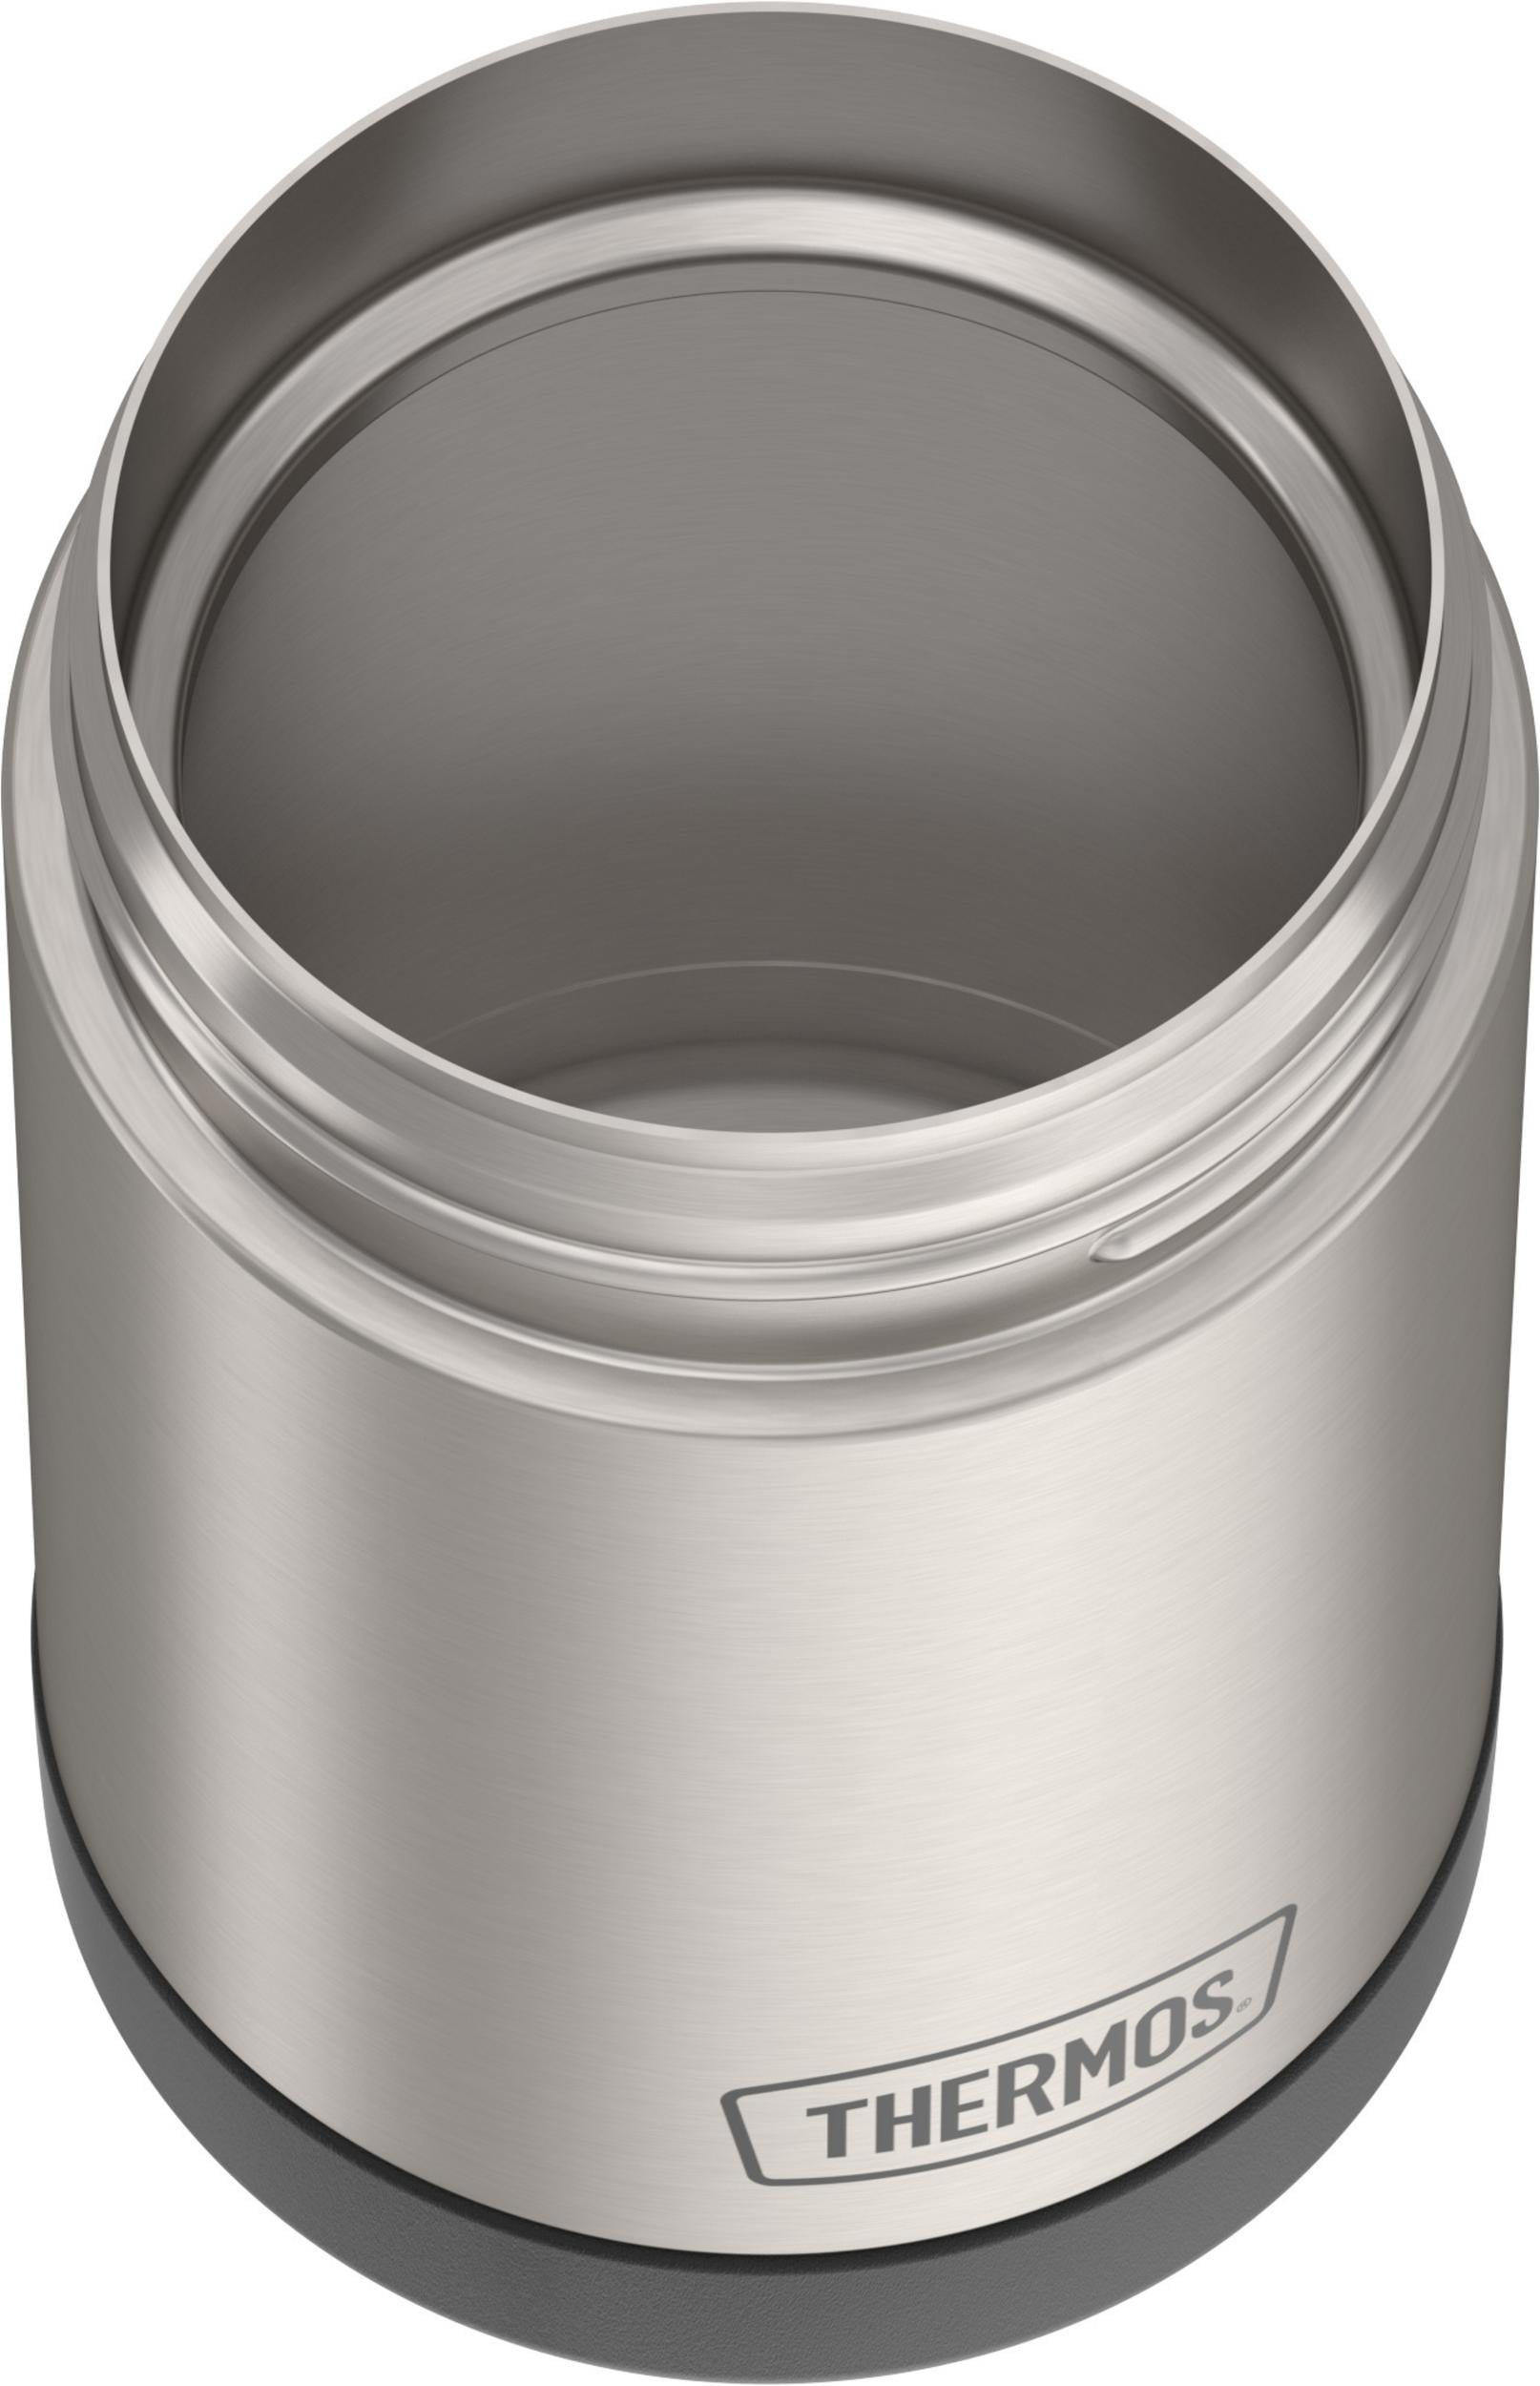 Have a question about Thermos Sipp 16 oz. Stainless Steel Black Food Jar? -  Pg 1 - The Home Depot